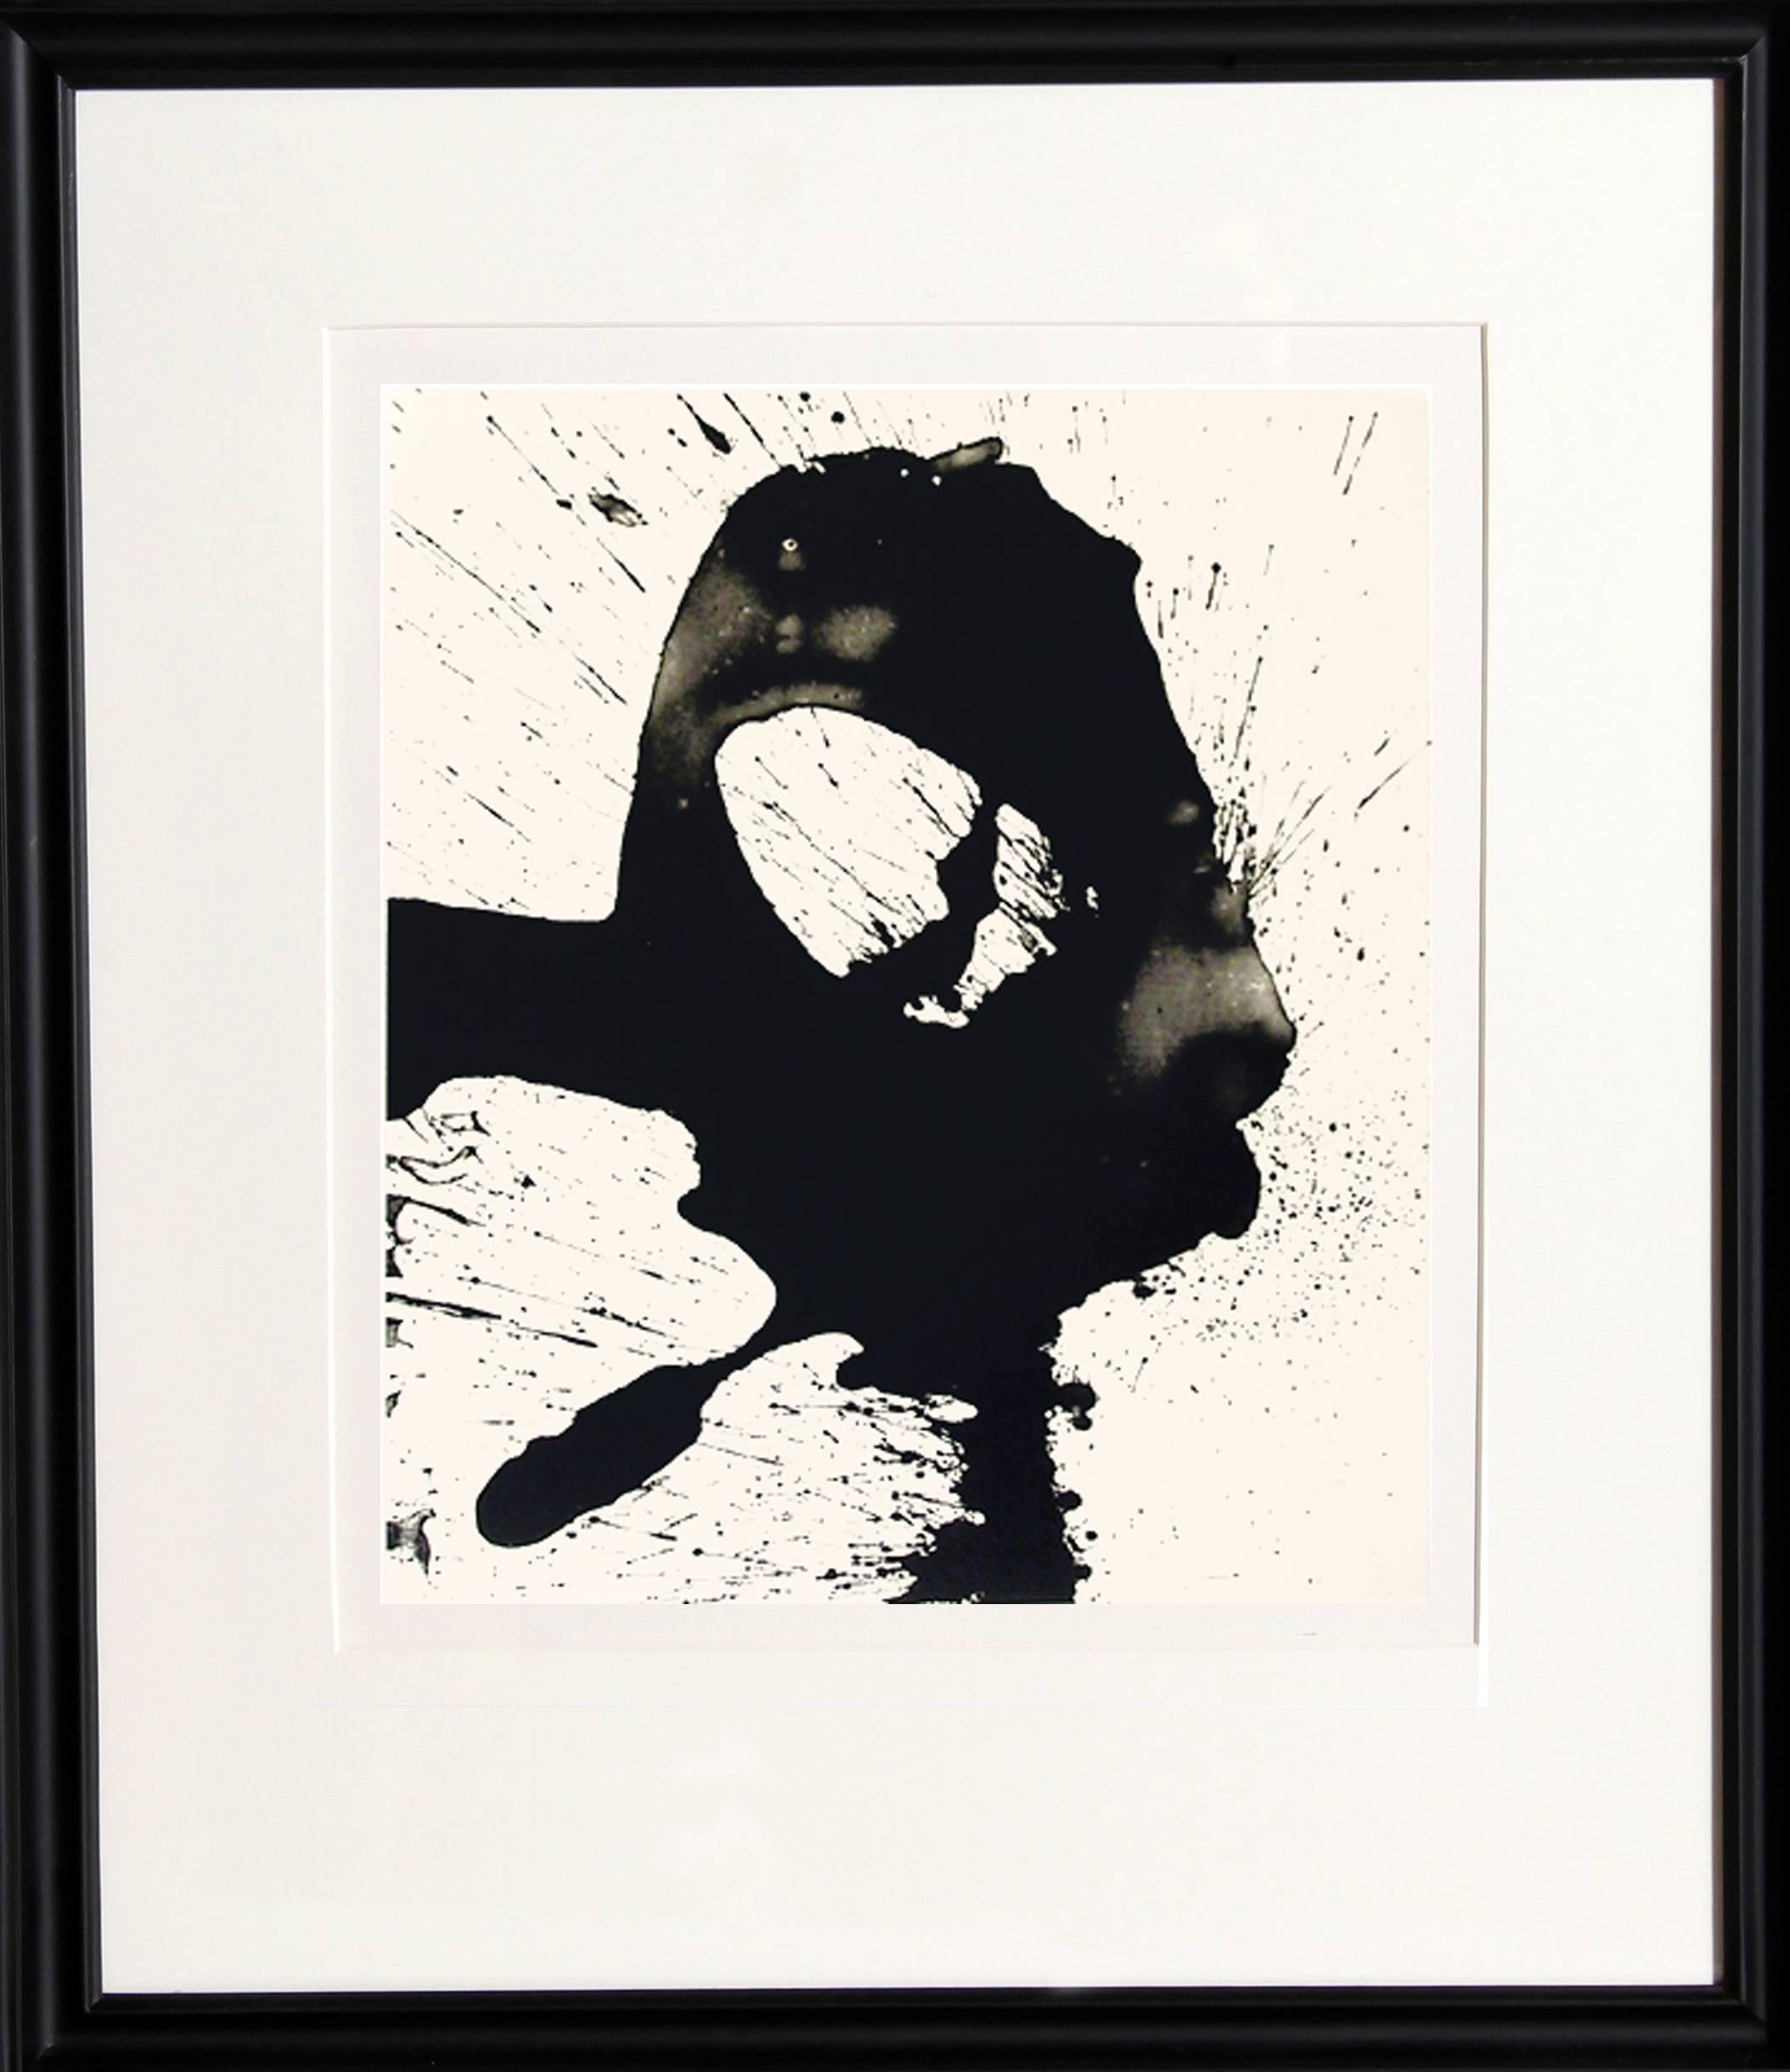 Robert Motherwell Abstract Print - No. 1 from Three Poems, collaboration with Octavio Paz